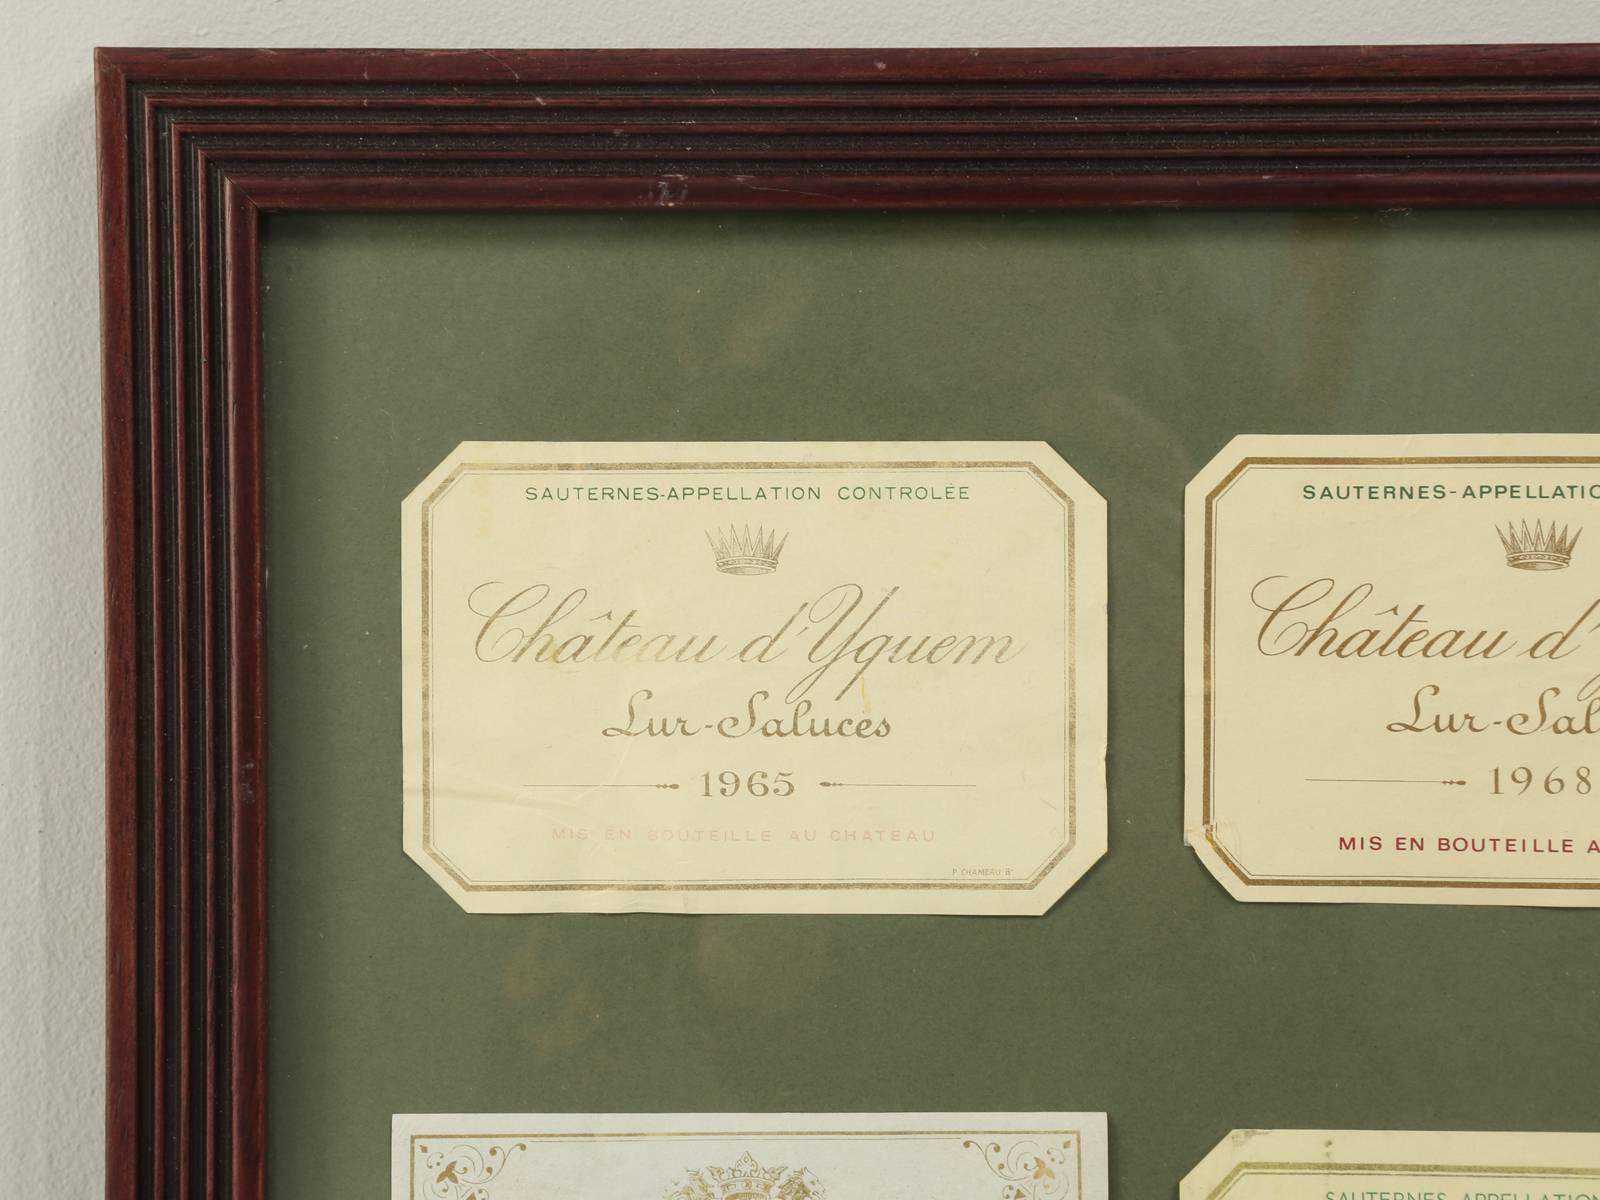 Collection of six old French wine labels, beginning with a 1949 Chateau Rabaud, Premier Cru Class Sauterne, up to a 1968 Chateau d’ Yquem.